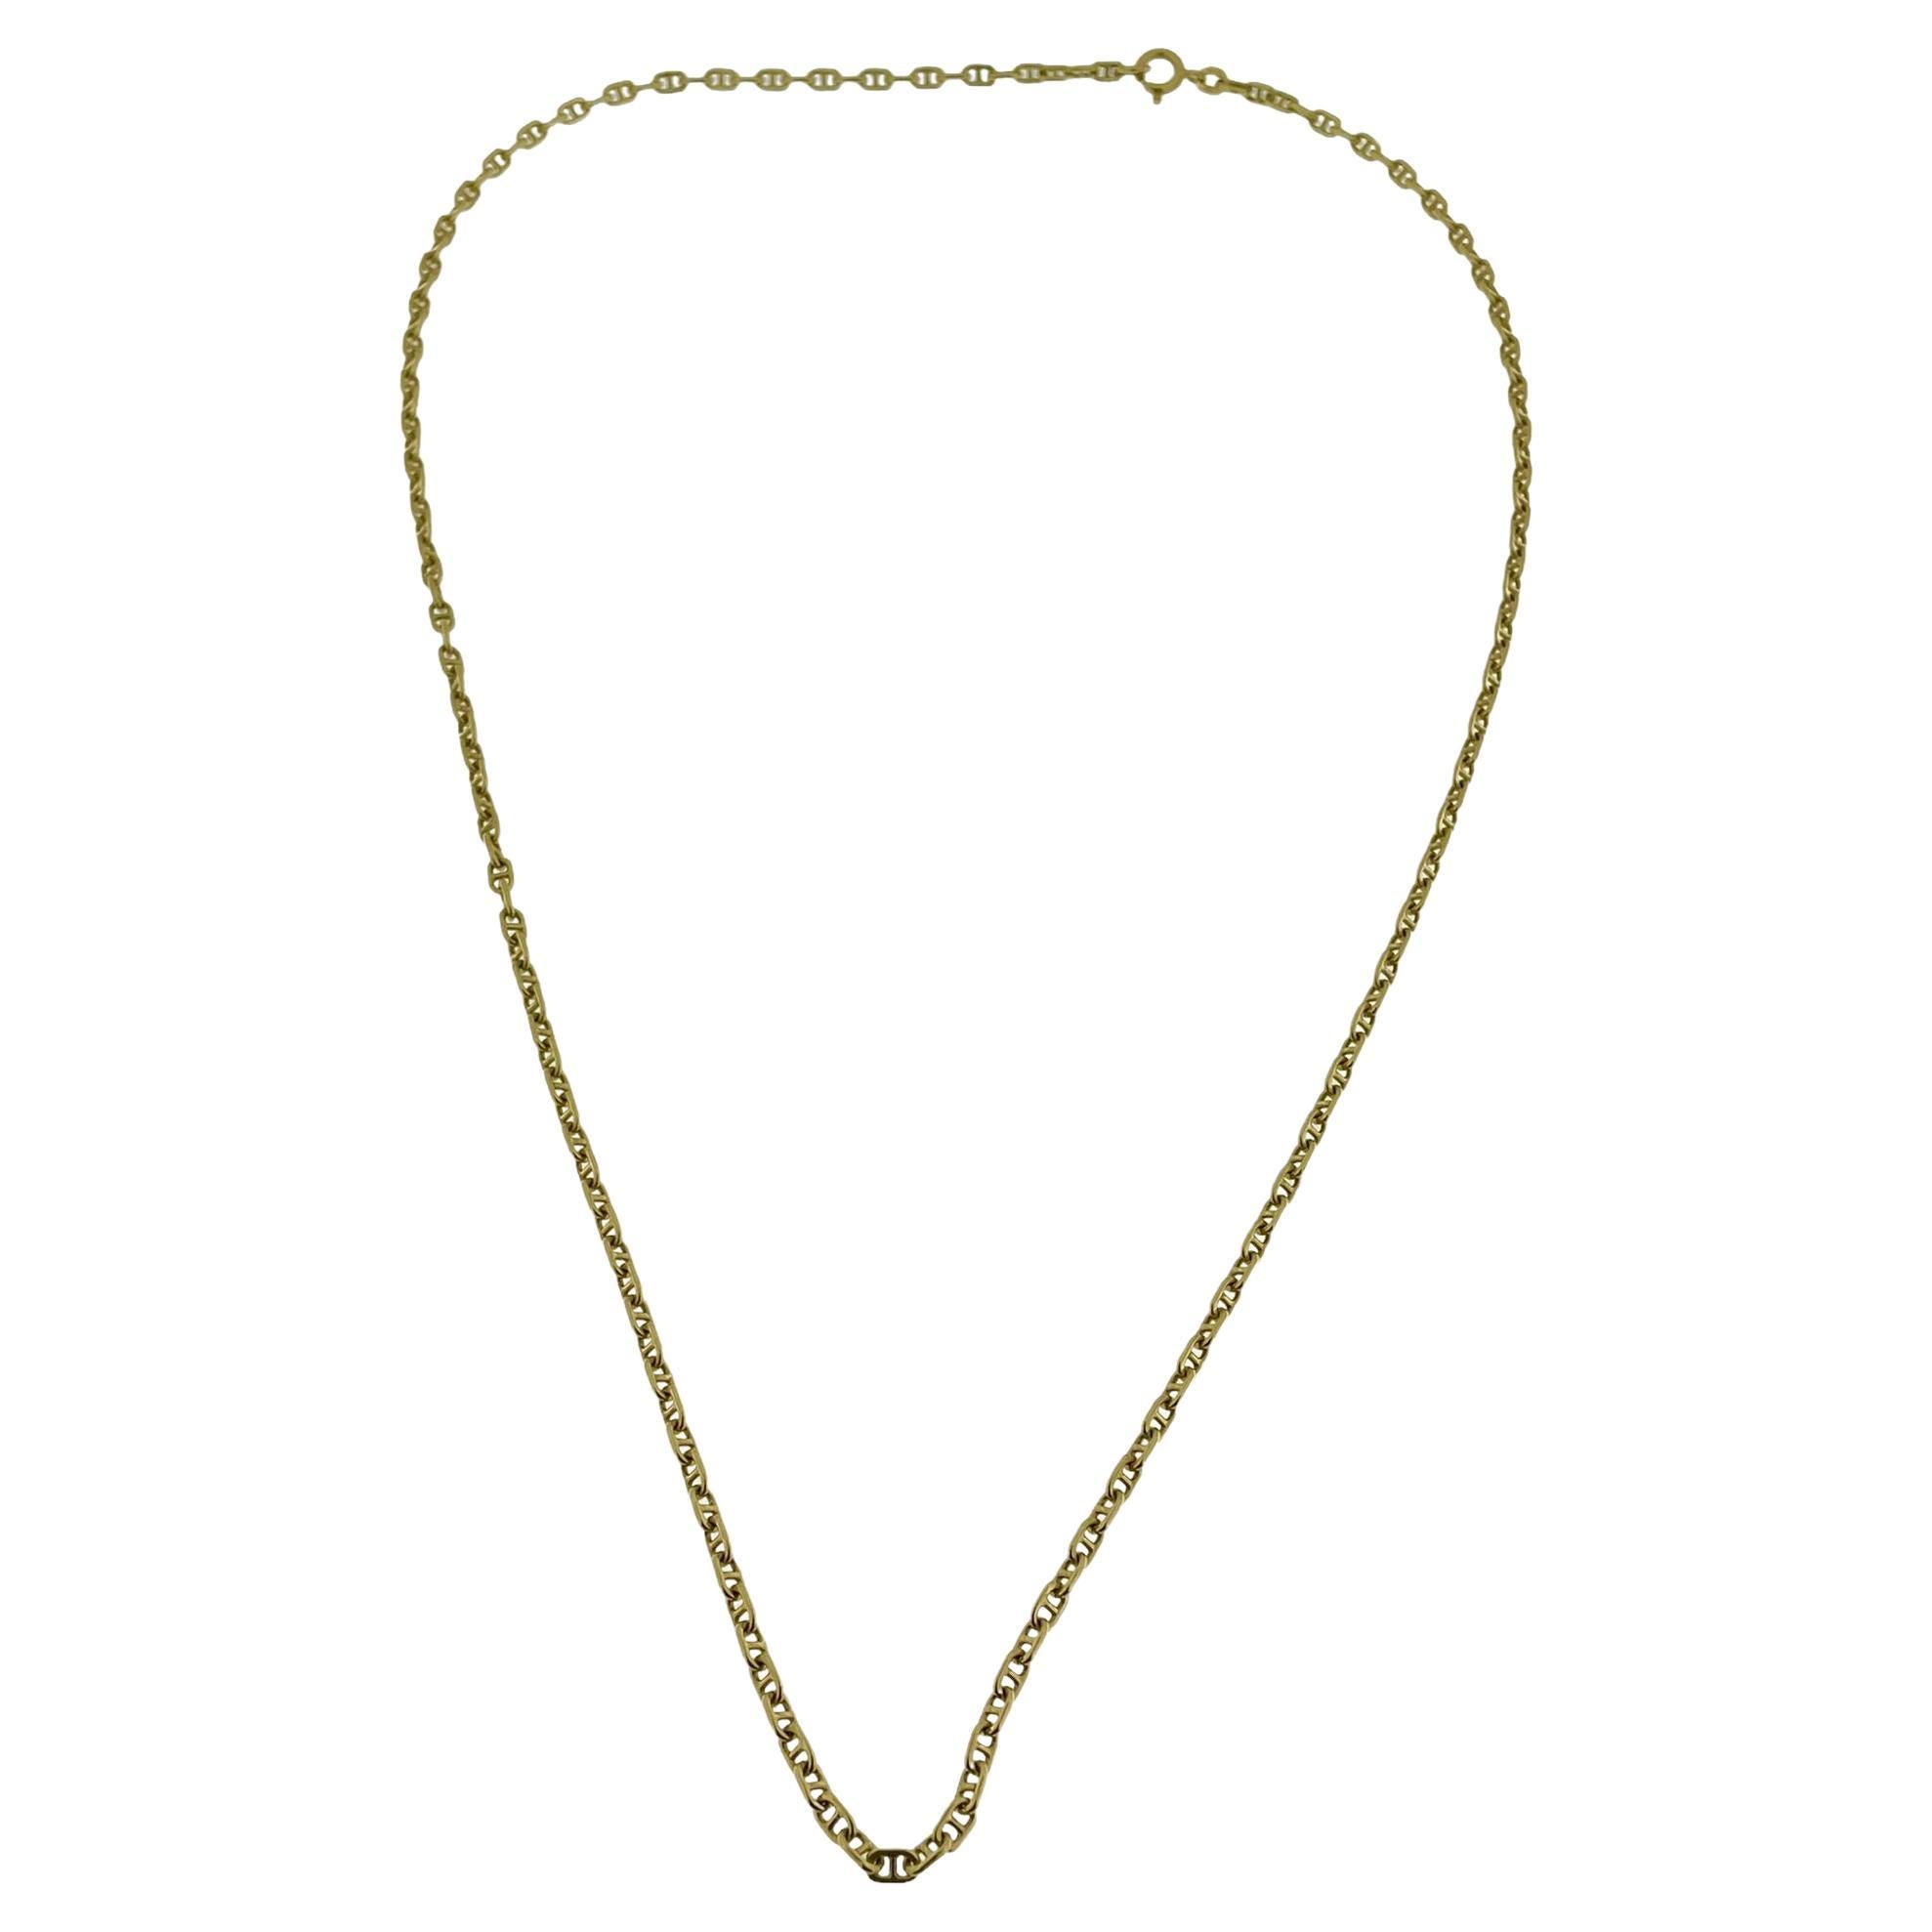 Italian Mariner Link Chain Yellow Gold by Balestra